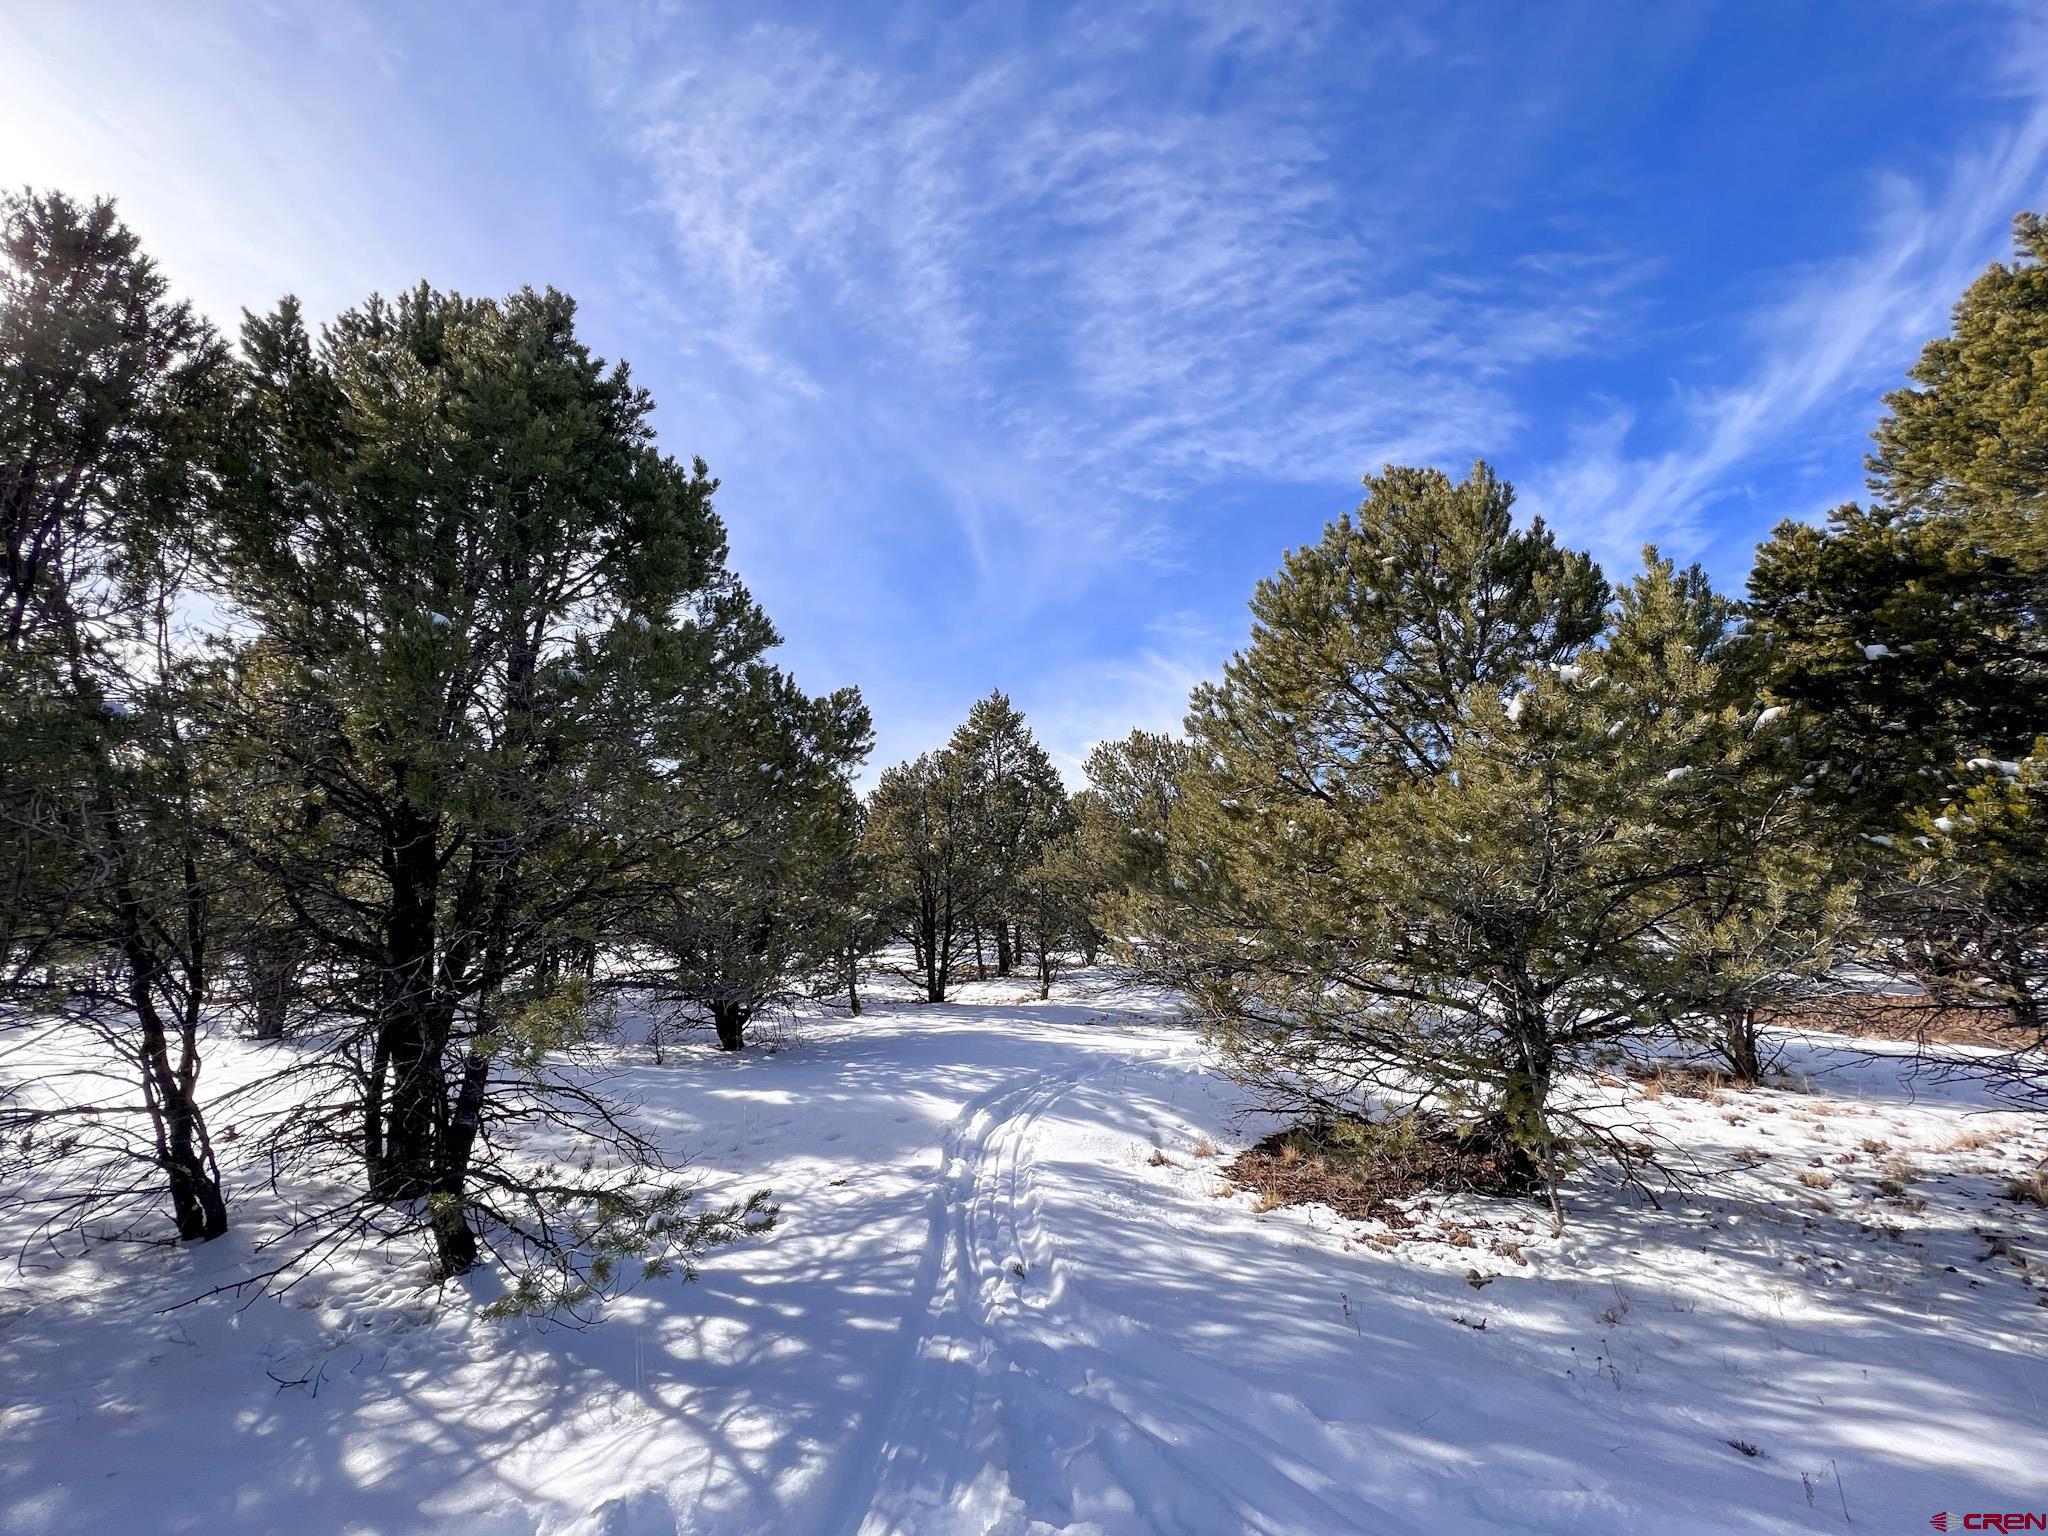 Tucked away on a quiet cul de sac in Loghill Village, this 4.9 acre lot is the perfect spot to build your dream home. The lot offers ample tree coverage and sweeping views of the Cimarrons. This is an easy to build on, relatively flat property that gently slopes toward the back of the lot. Minimal dwelling size is 1000 square feet for single story and 1500 square feet for two story.